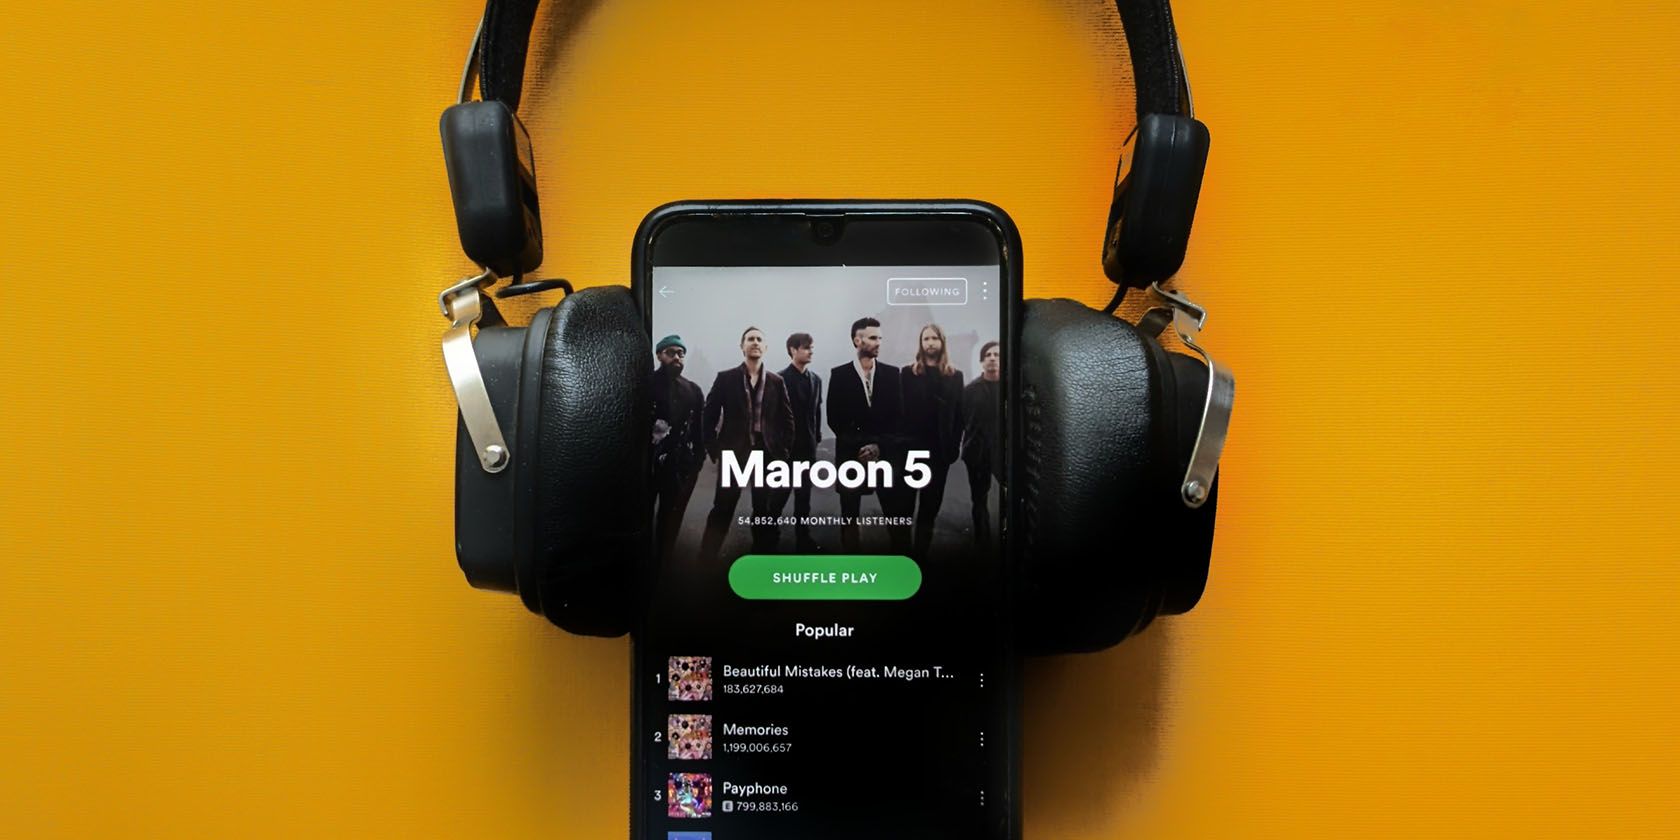 Spotify with Maroon 5